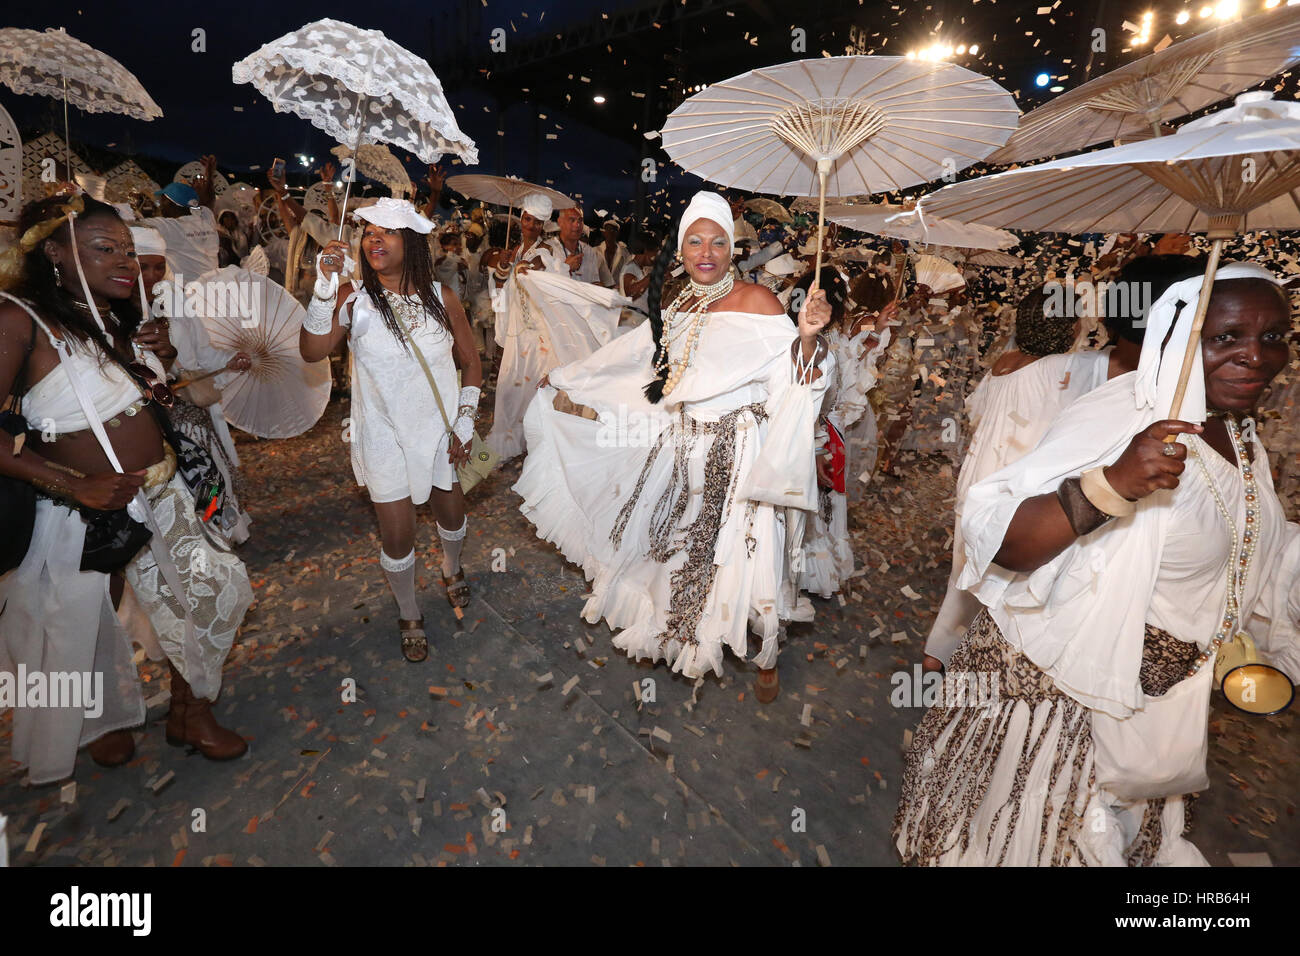 Port of Spain, Trinidad. 28th February, 2017. Masqueraders with MacFarlane Mas present 'Cazabon - The Art of Living'  in the Queen's Park Savannah during Trinidad Carnival on February 28, 2017 in Port of Spain, Trinidad.  (Photo by Sean Drakes/Alamy Live News) Stock Photo